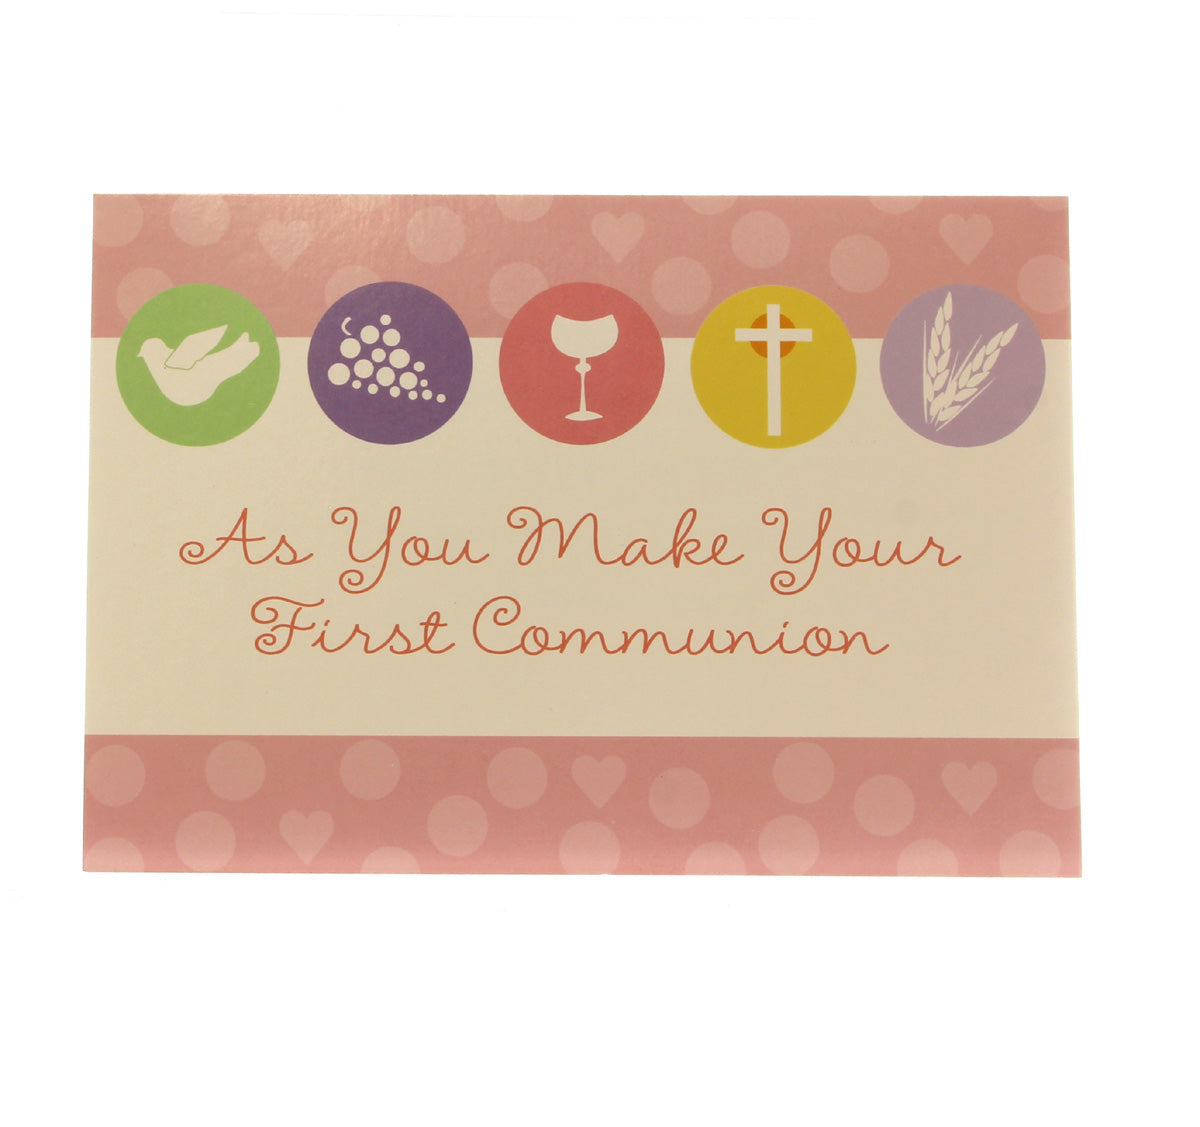 First Communion Card: As you make your first ... (pink card)